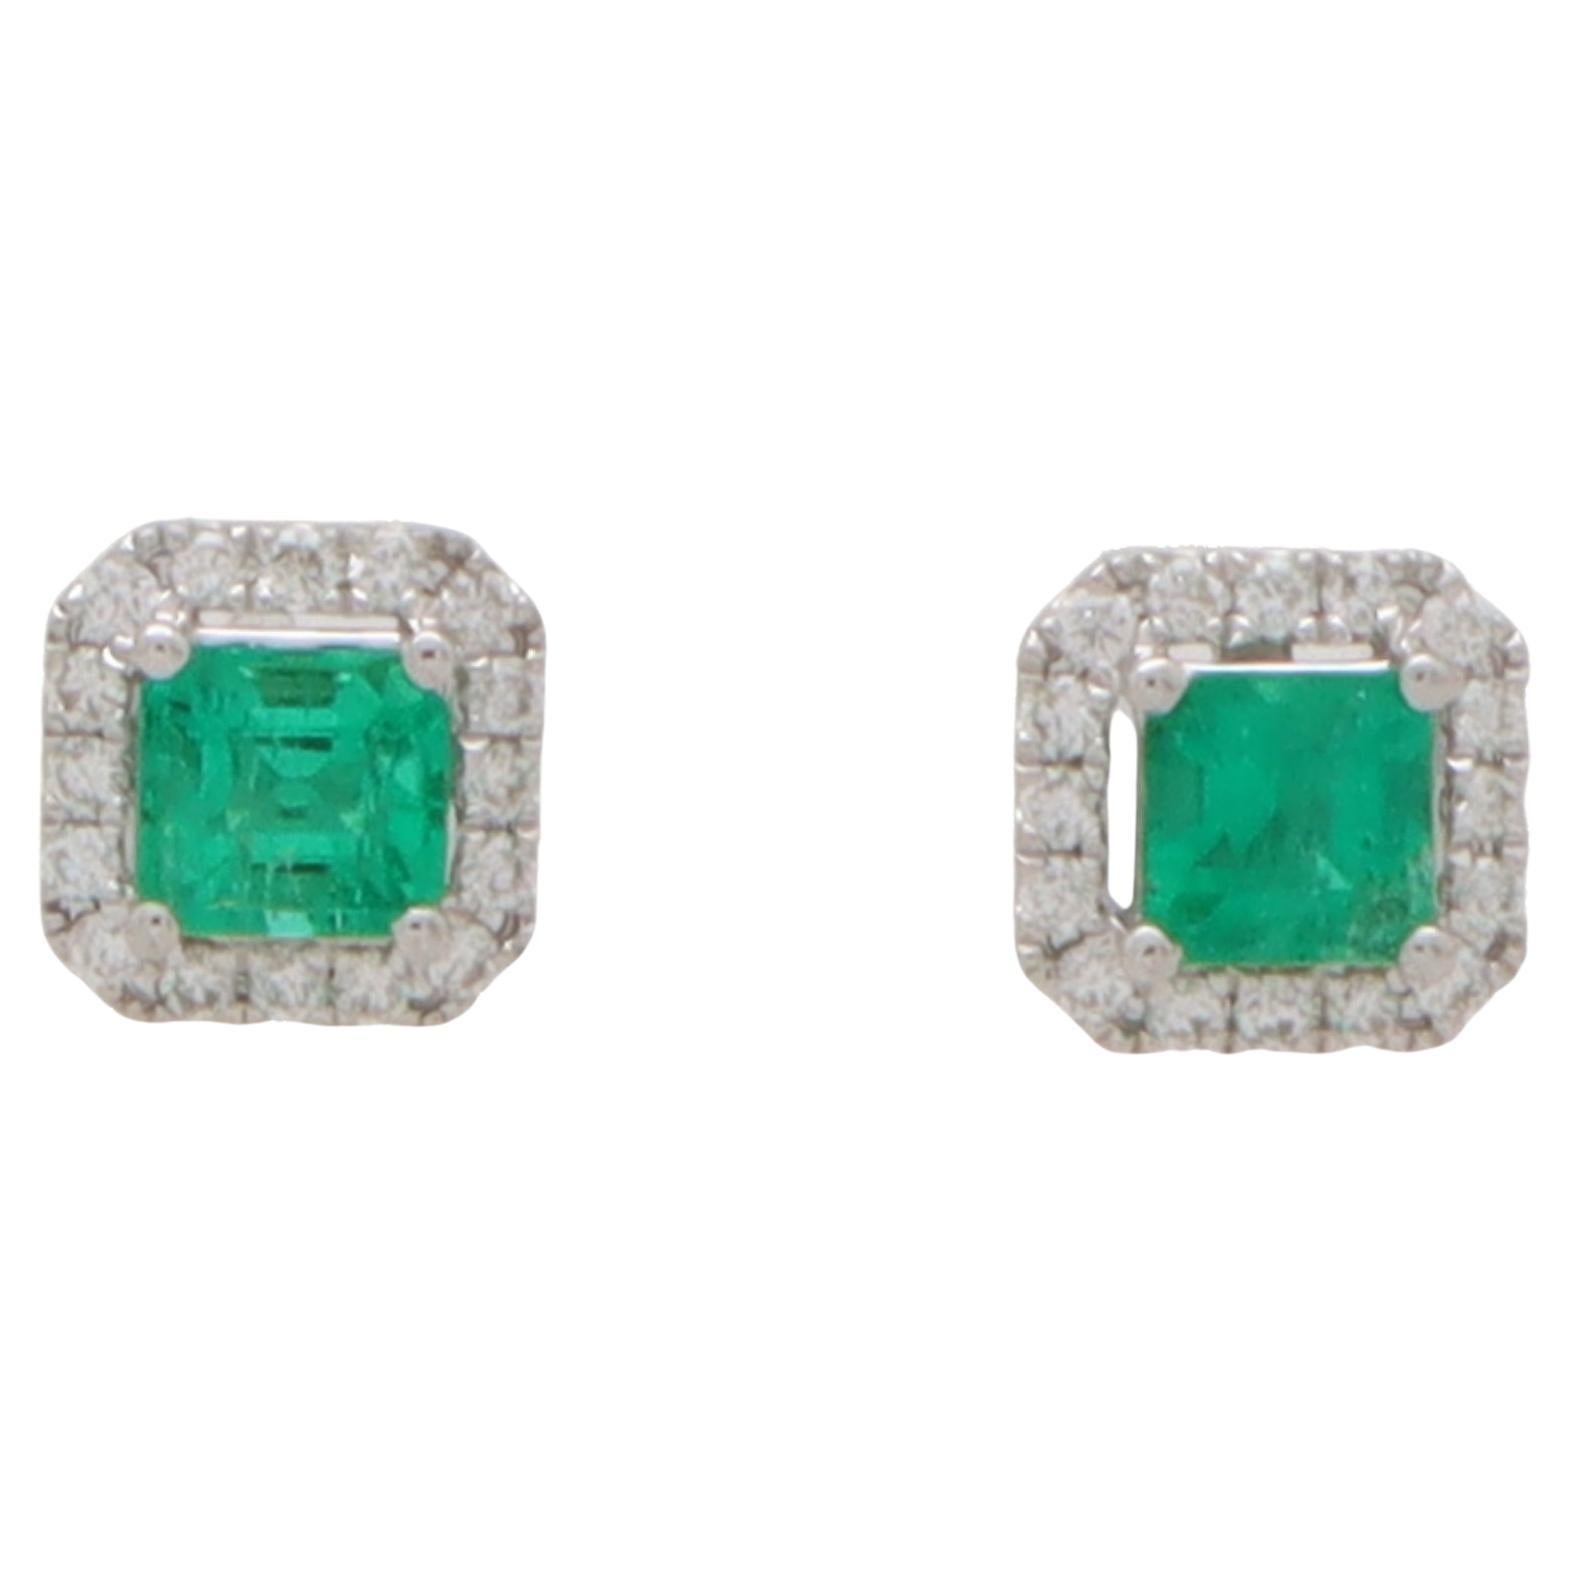  Squared Emerald and Diamond Cluster Stud Earrings